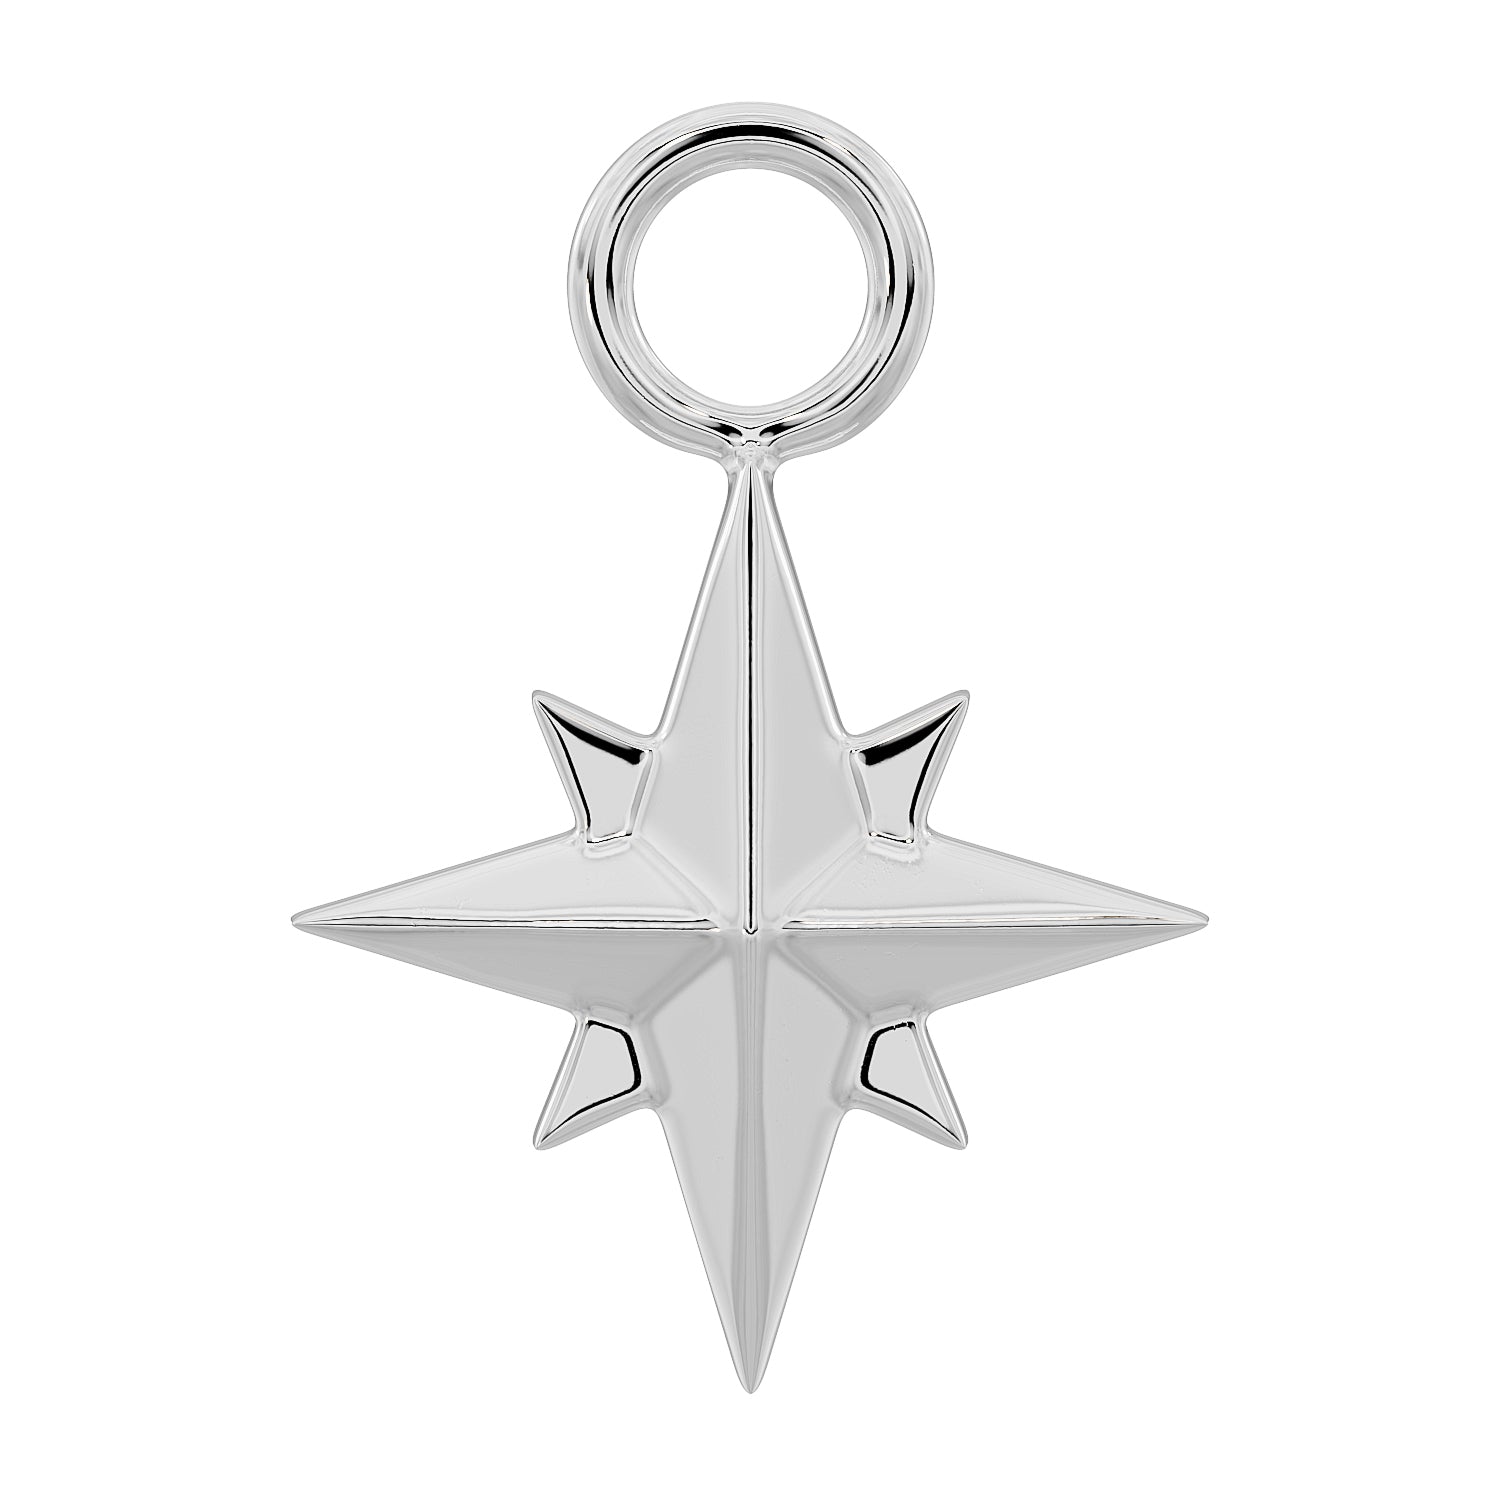 North Star Charm Accessory for Piercing Jewelry-14K White Gold